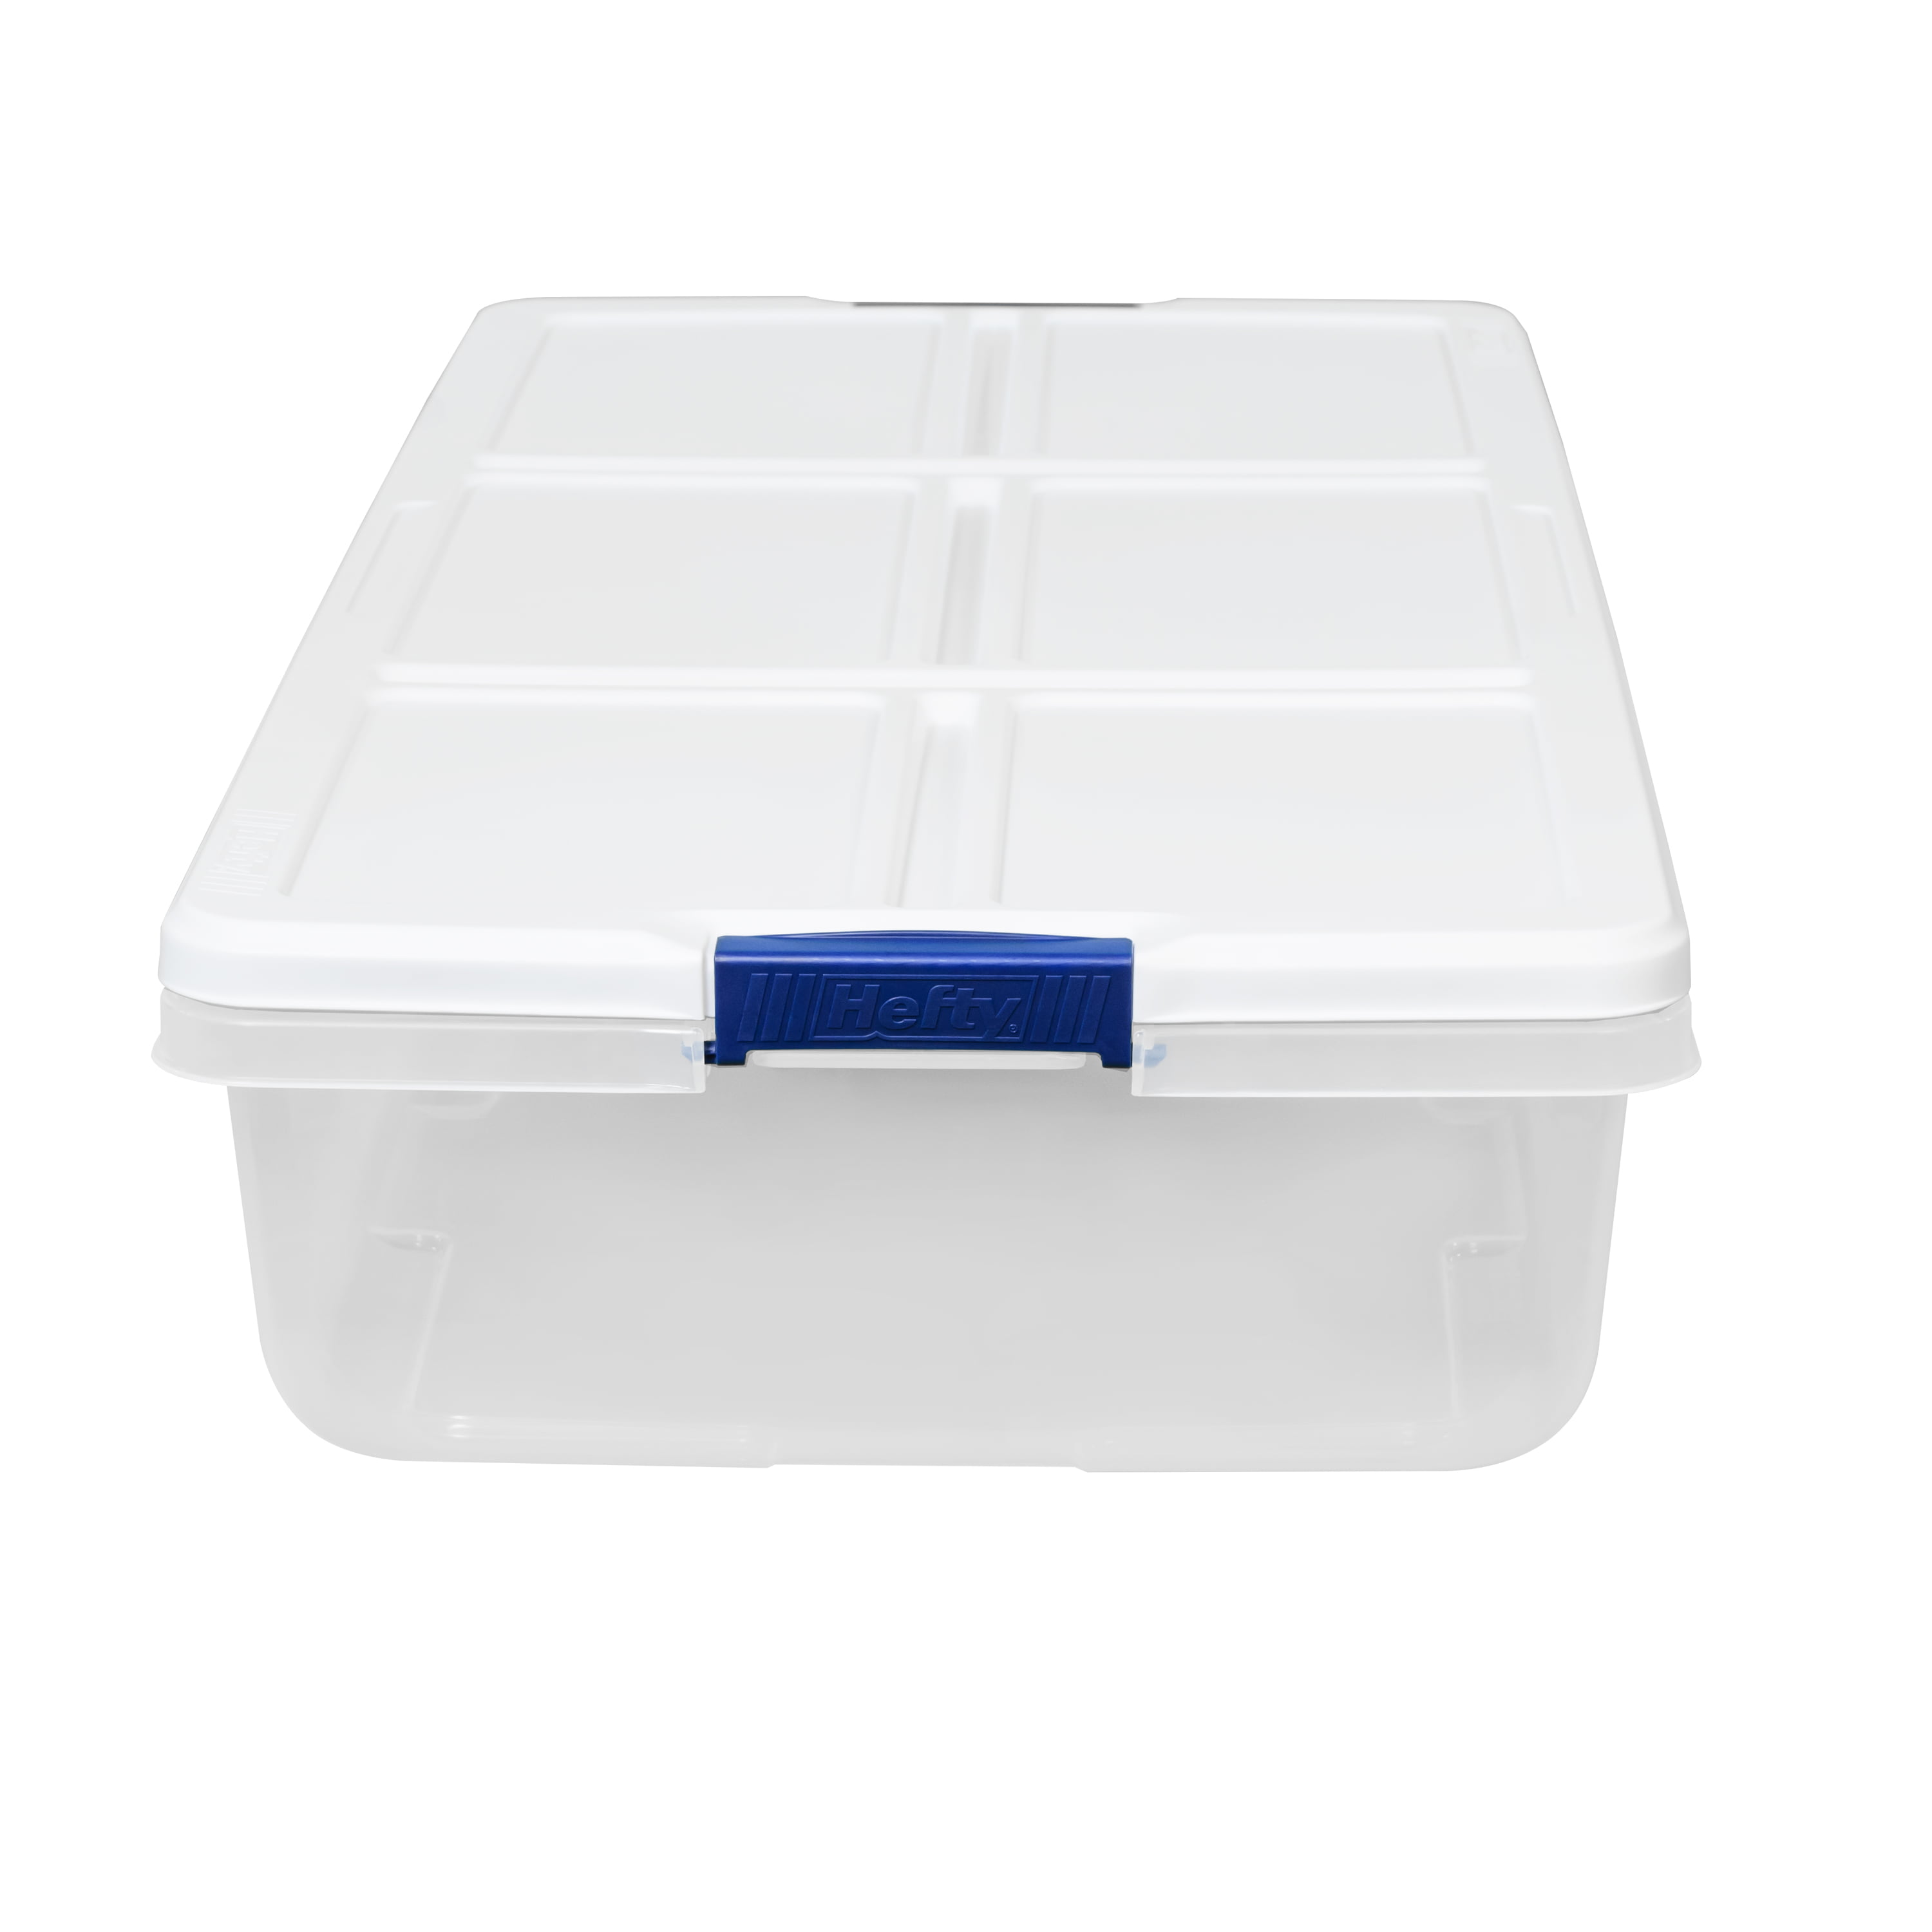 OEMVALATY 52 qt. Large Storage Bins with Lids,Stackable Foldable Plastic Storage Boxes with Buckles and Handles,Large Capacity Containers for